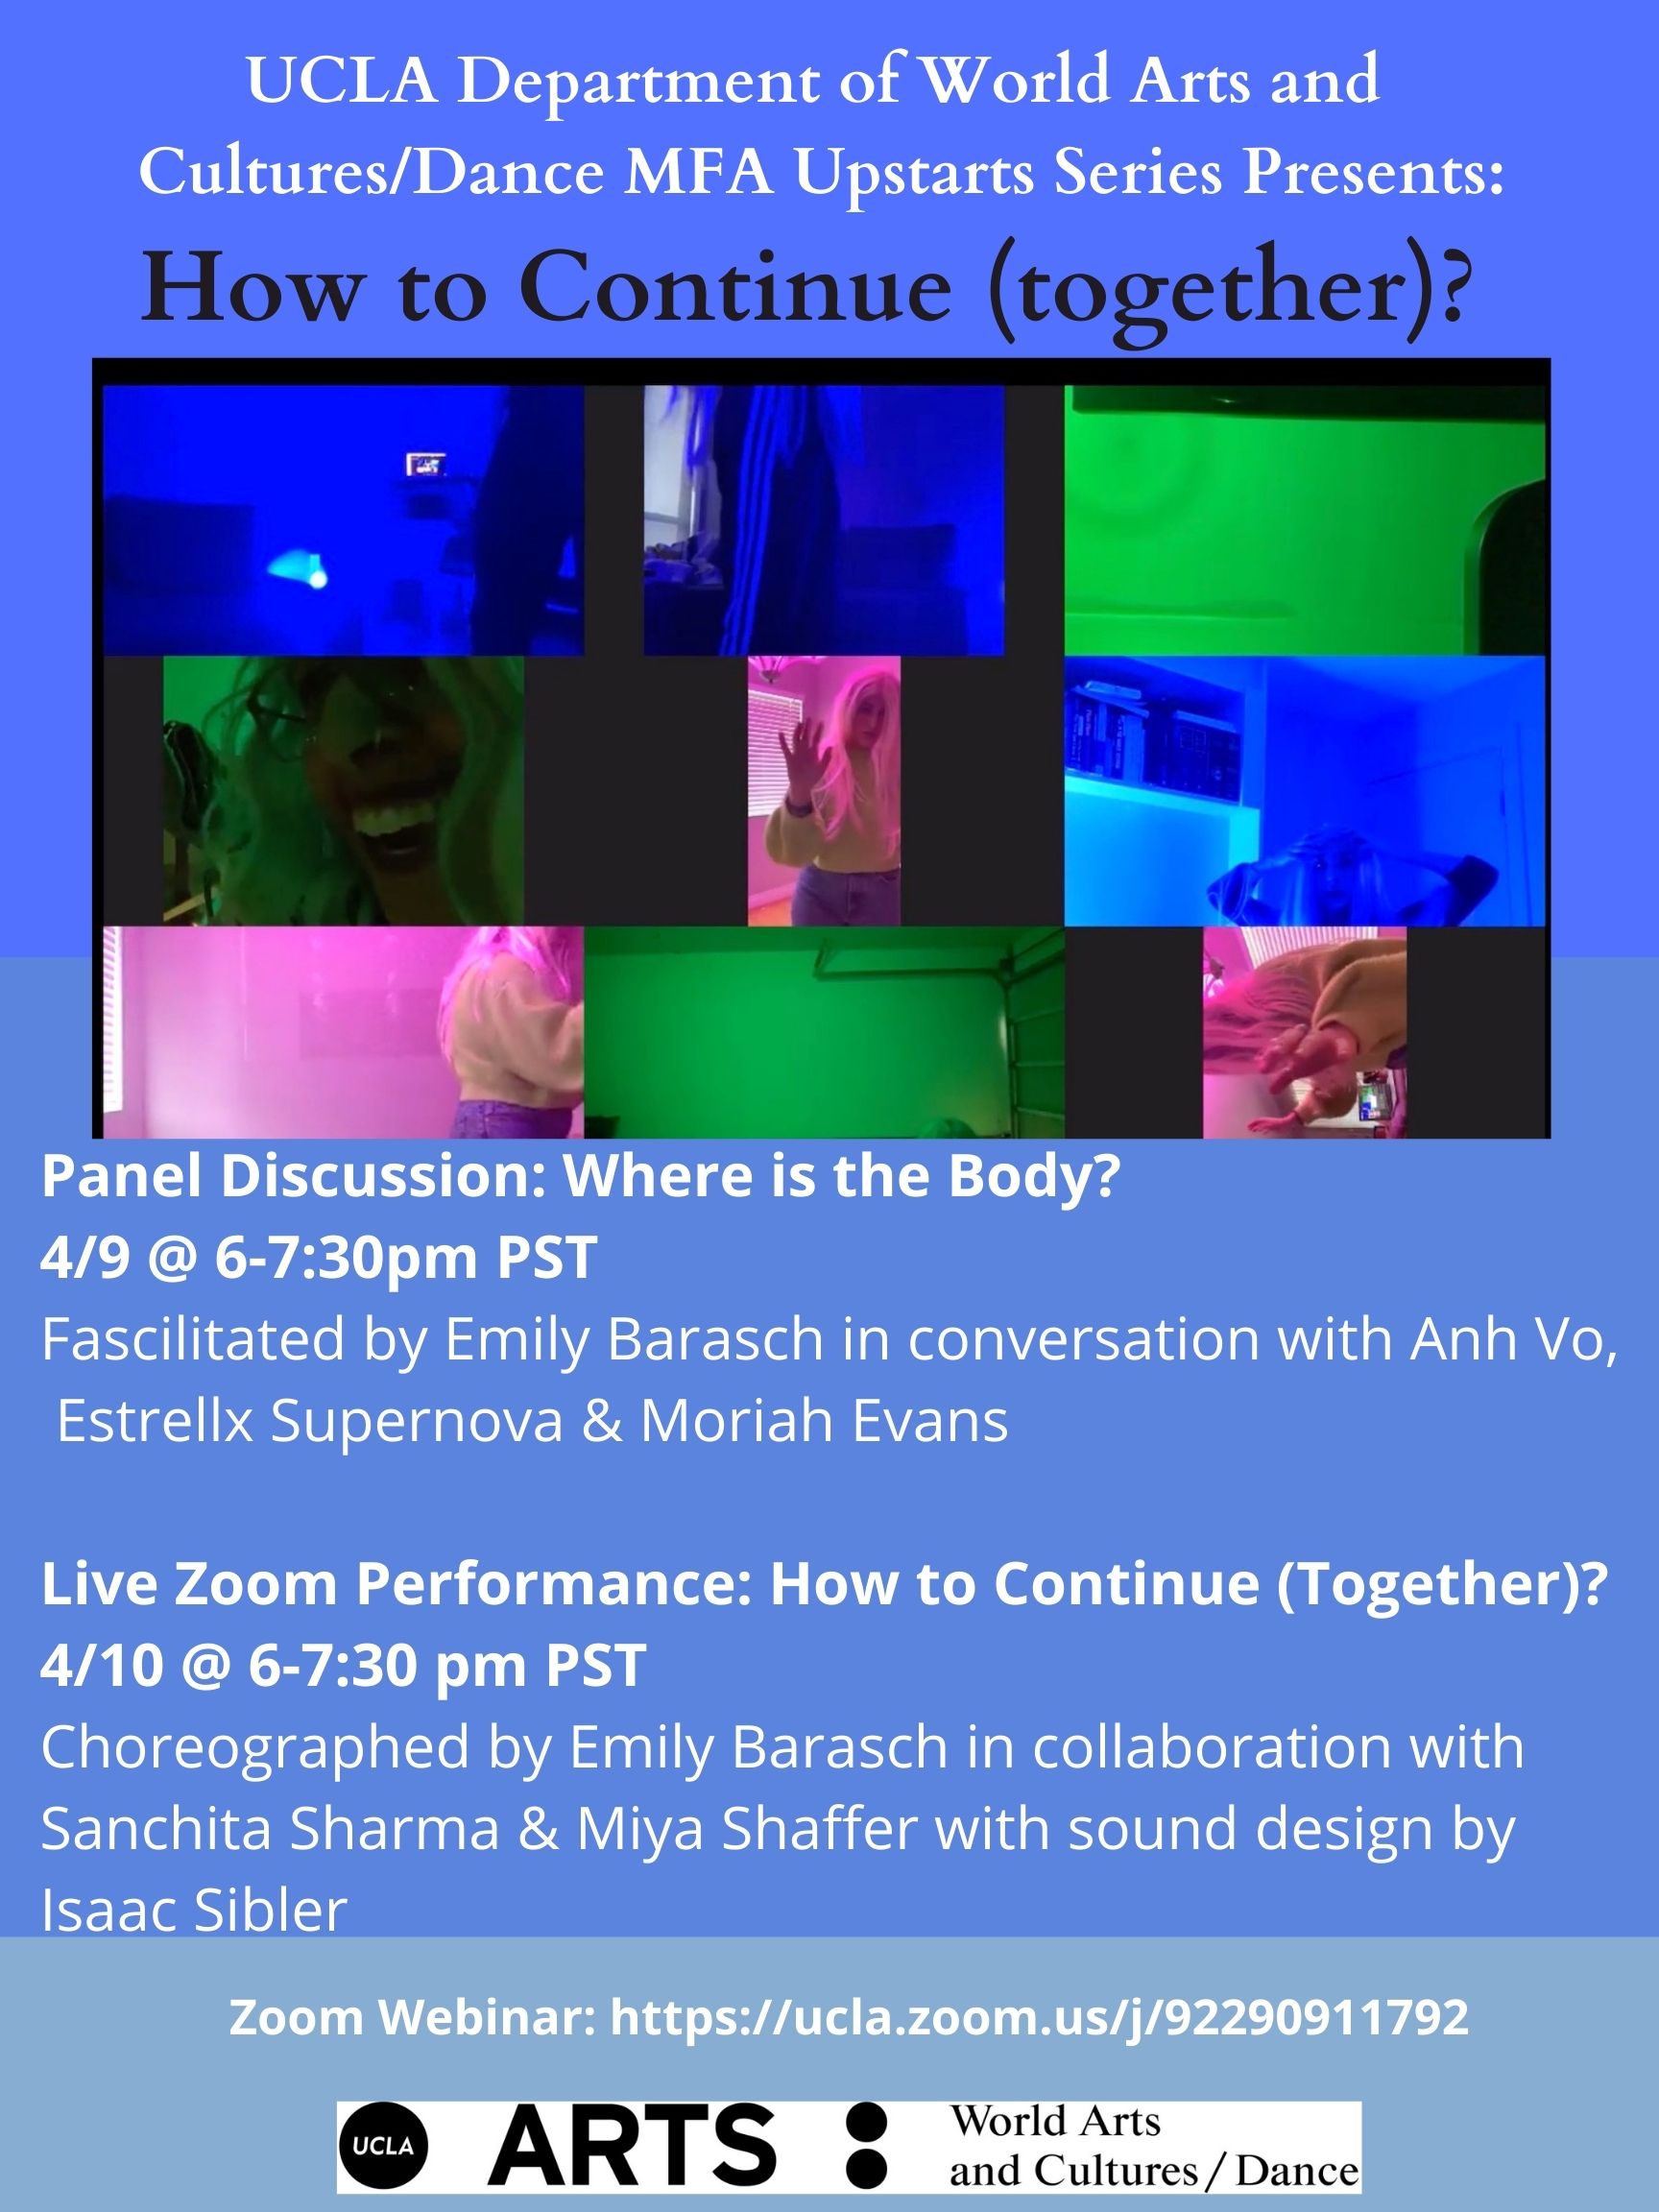 UCLA Department of World Arts and Cultures/Dance MFA Upstarts Series presents: How to Continue (Together)? Is a two night event comprised of a panel discussion and a live zoom performance.